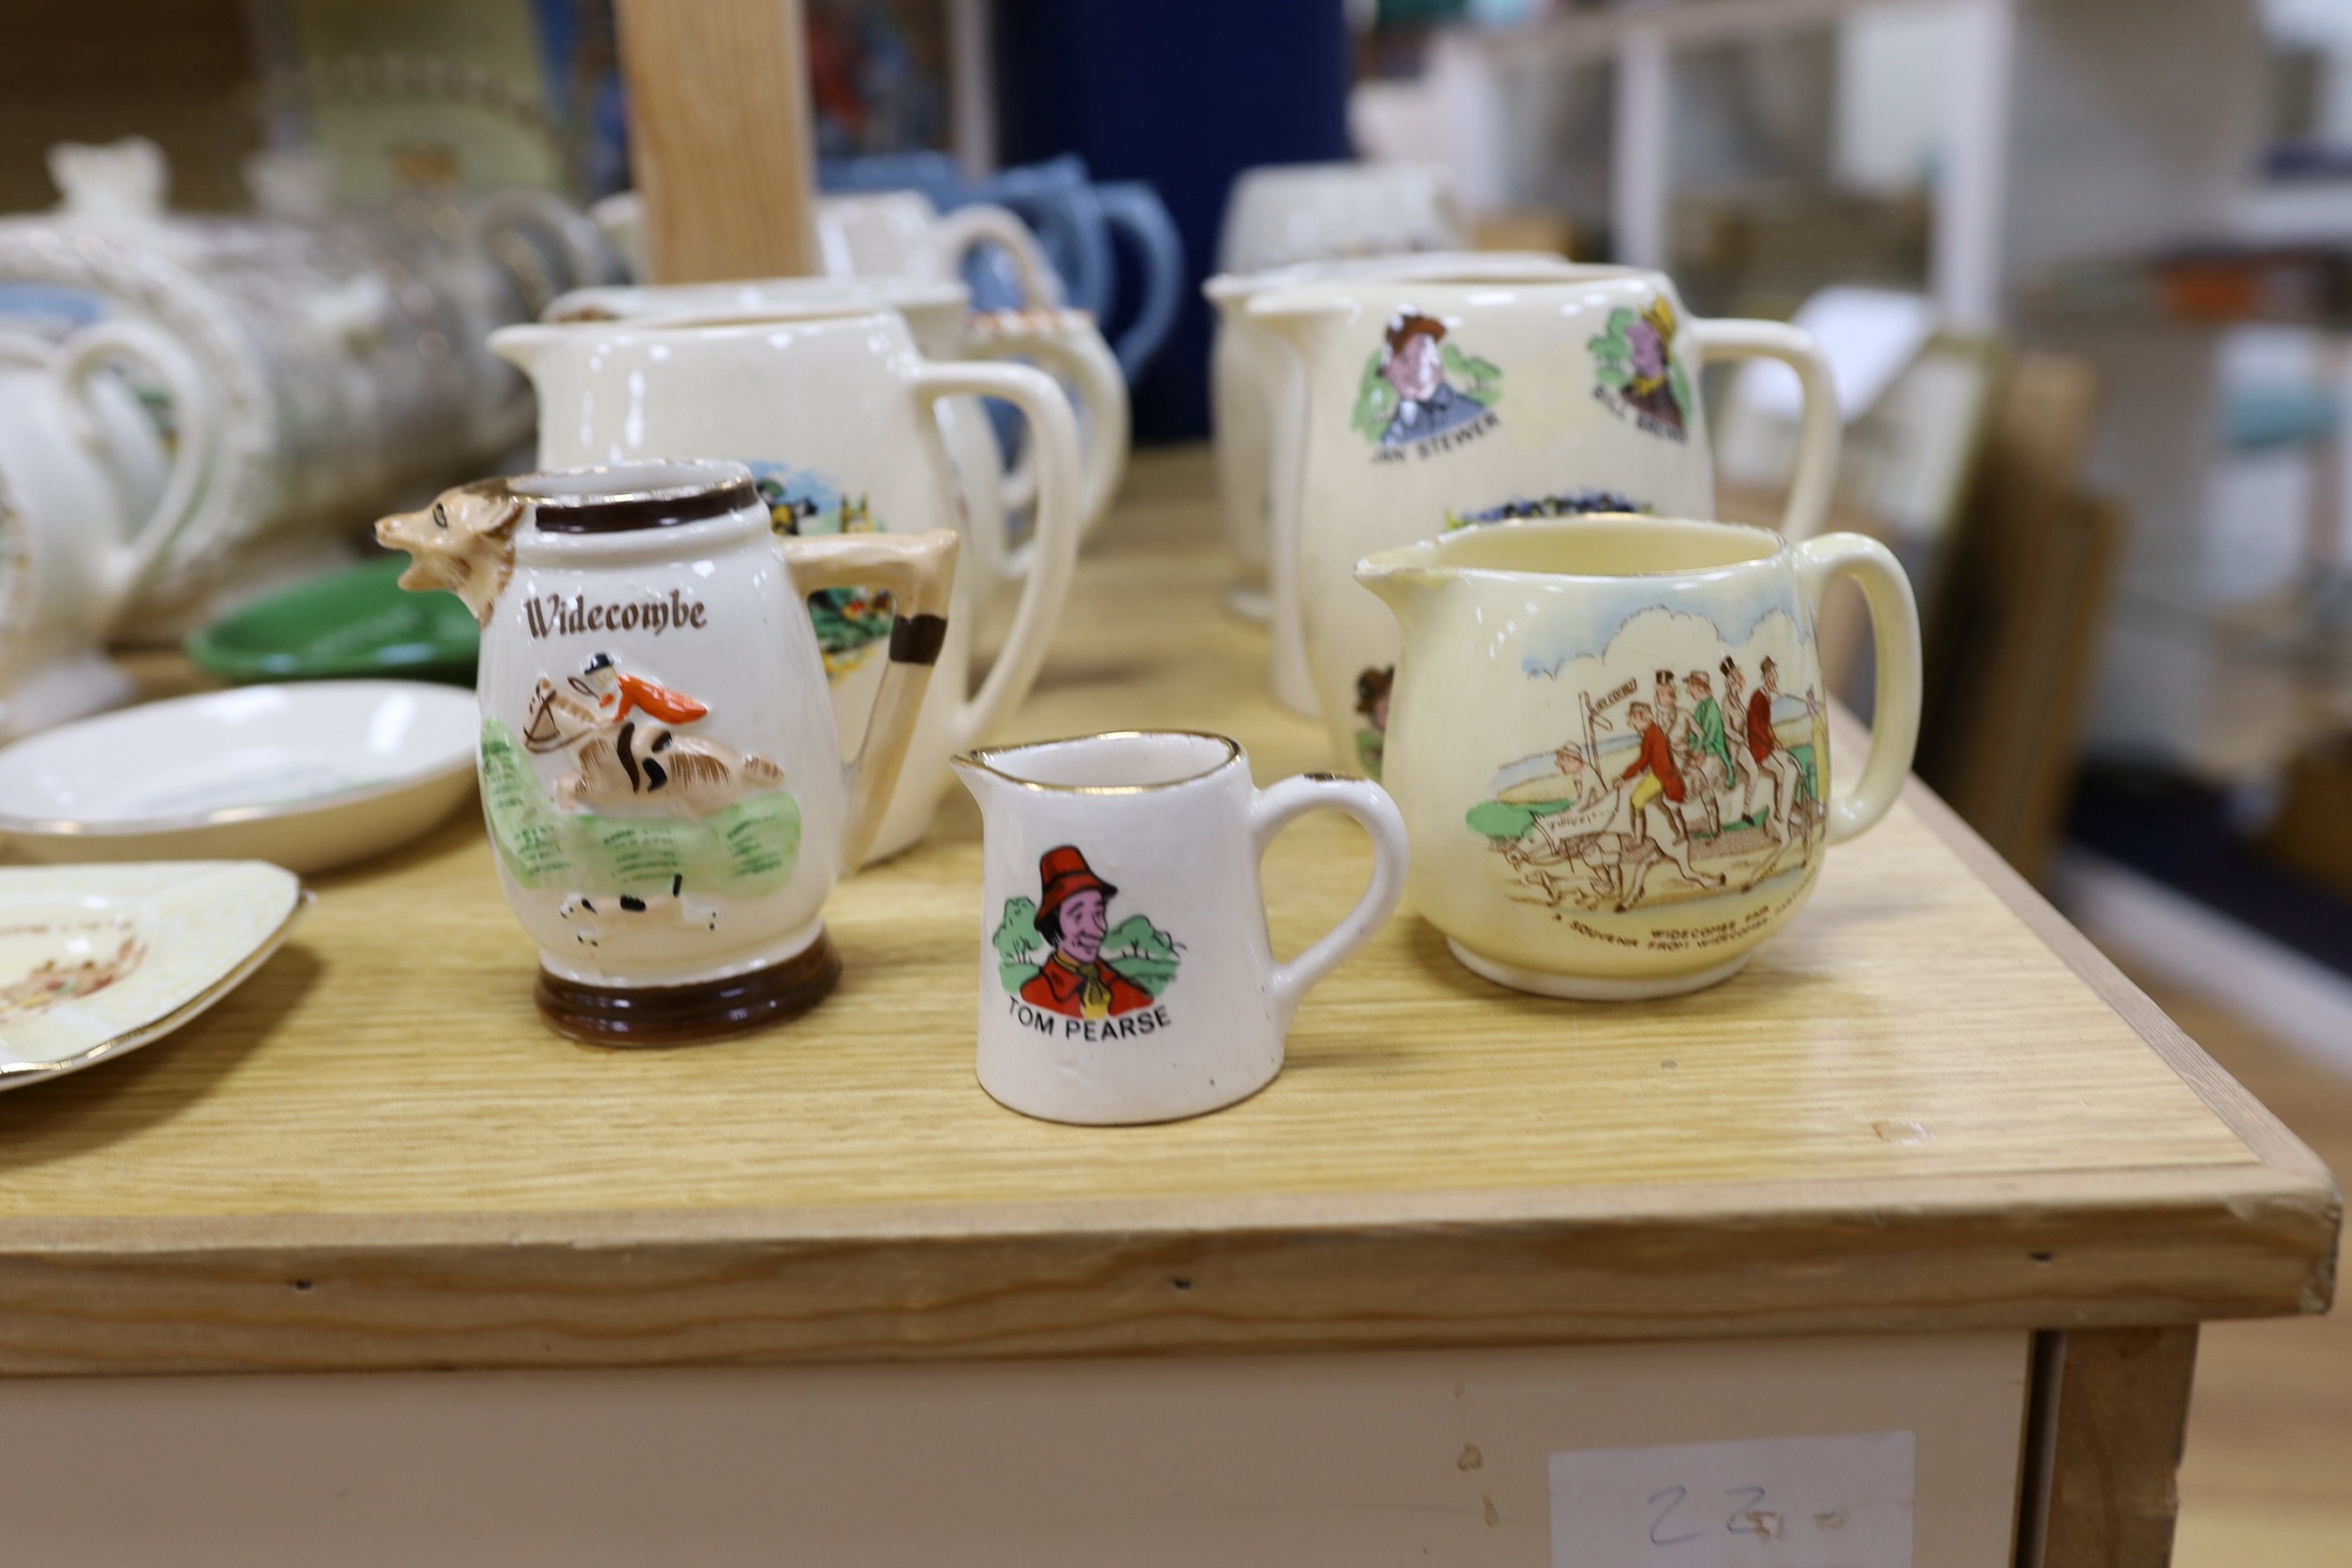 A quantity of novelty items relating to Widecombe Fair, to include jugs, teapots etc. - Image 2 of 4